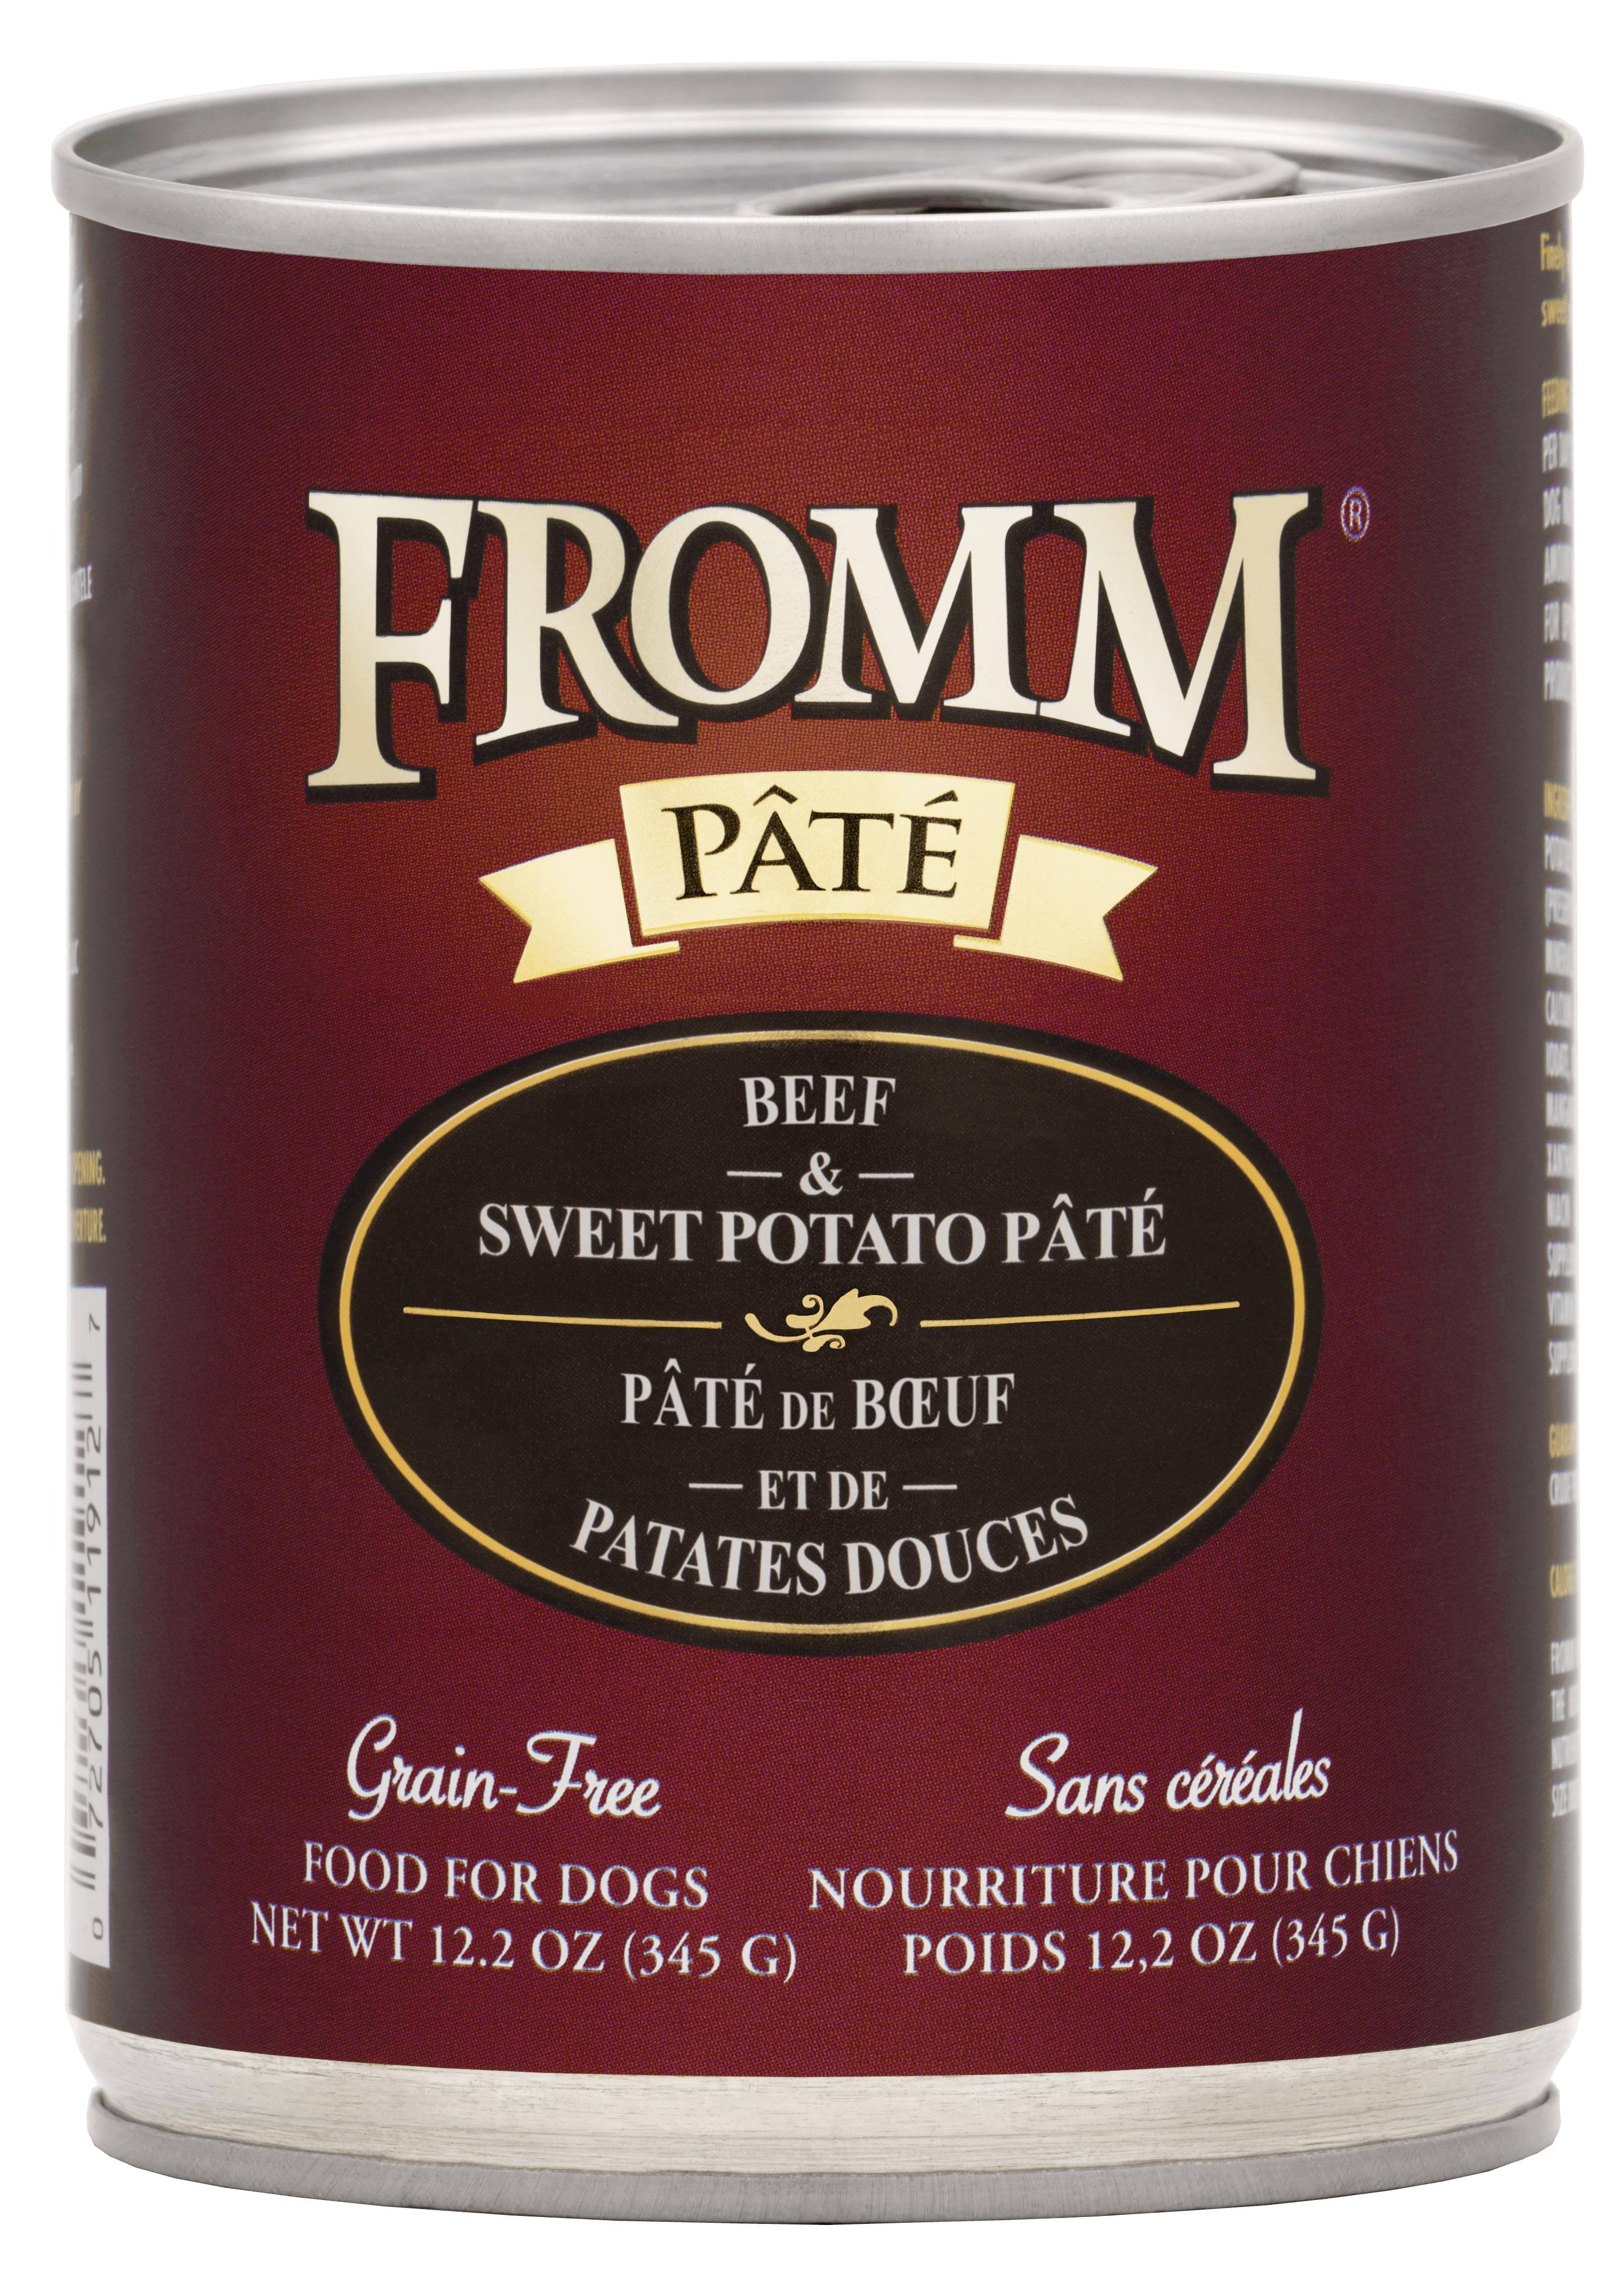 Fromm Grain Free Beef & Sweet Potato Pate Canned Dog Food - 12.2 oz, Case of 12